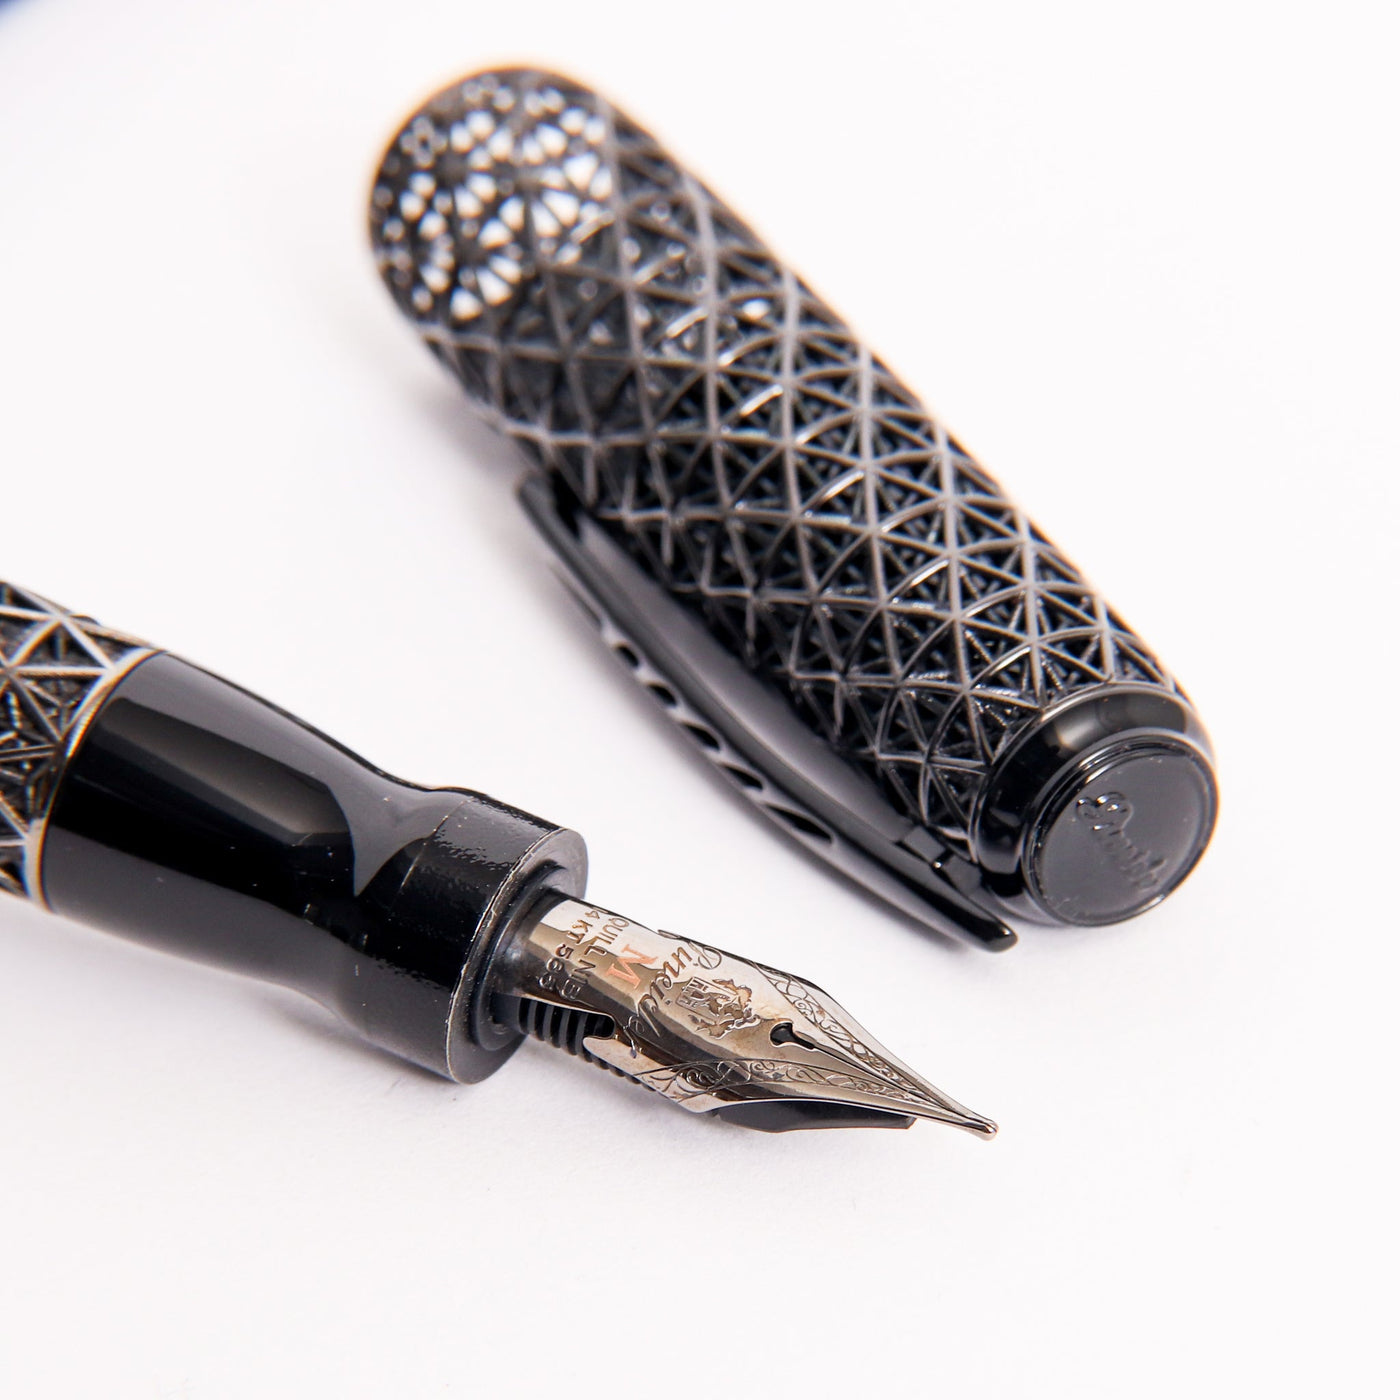 Pineider Psycho Black with Black Trim Fountain Pen Sterling Silver